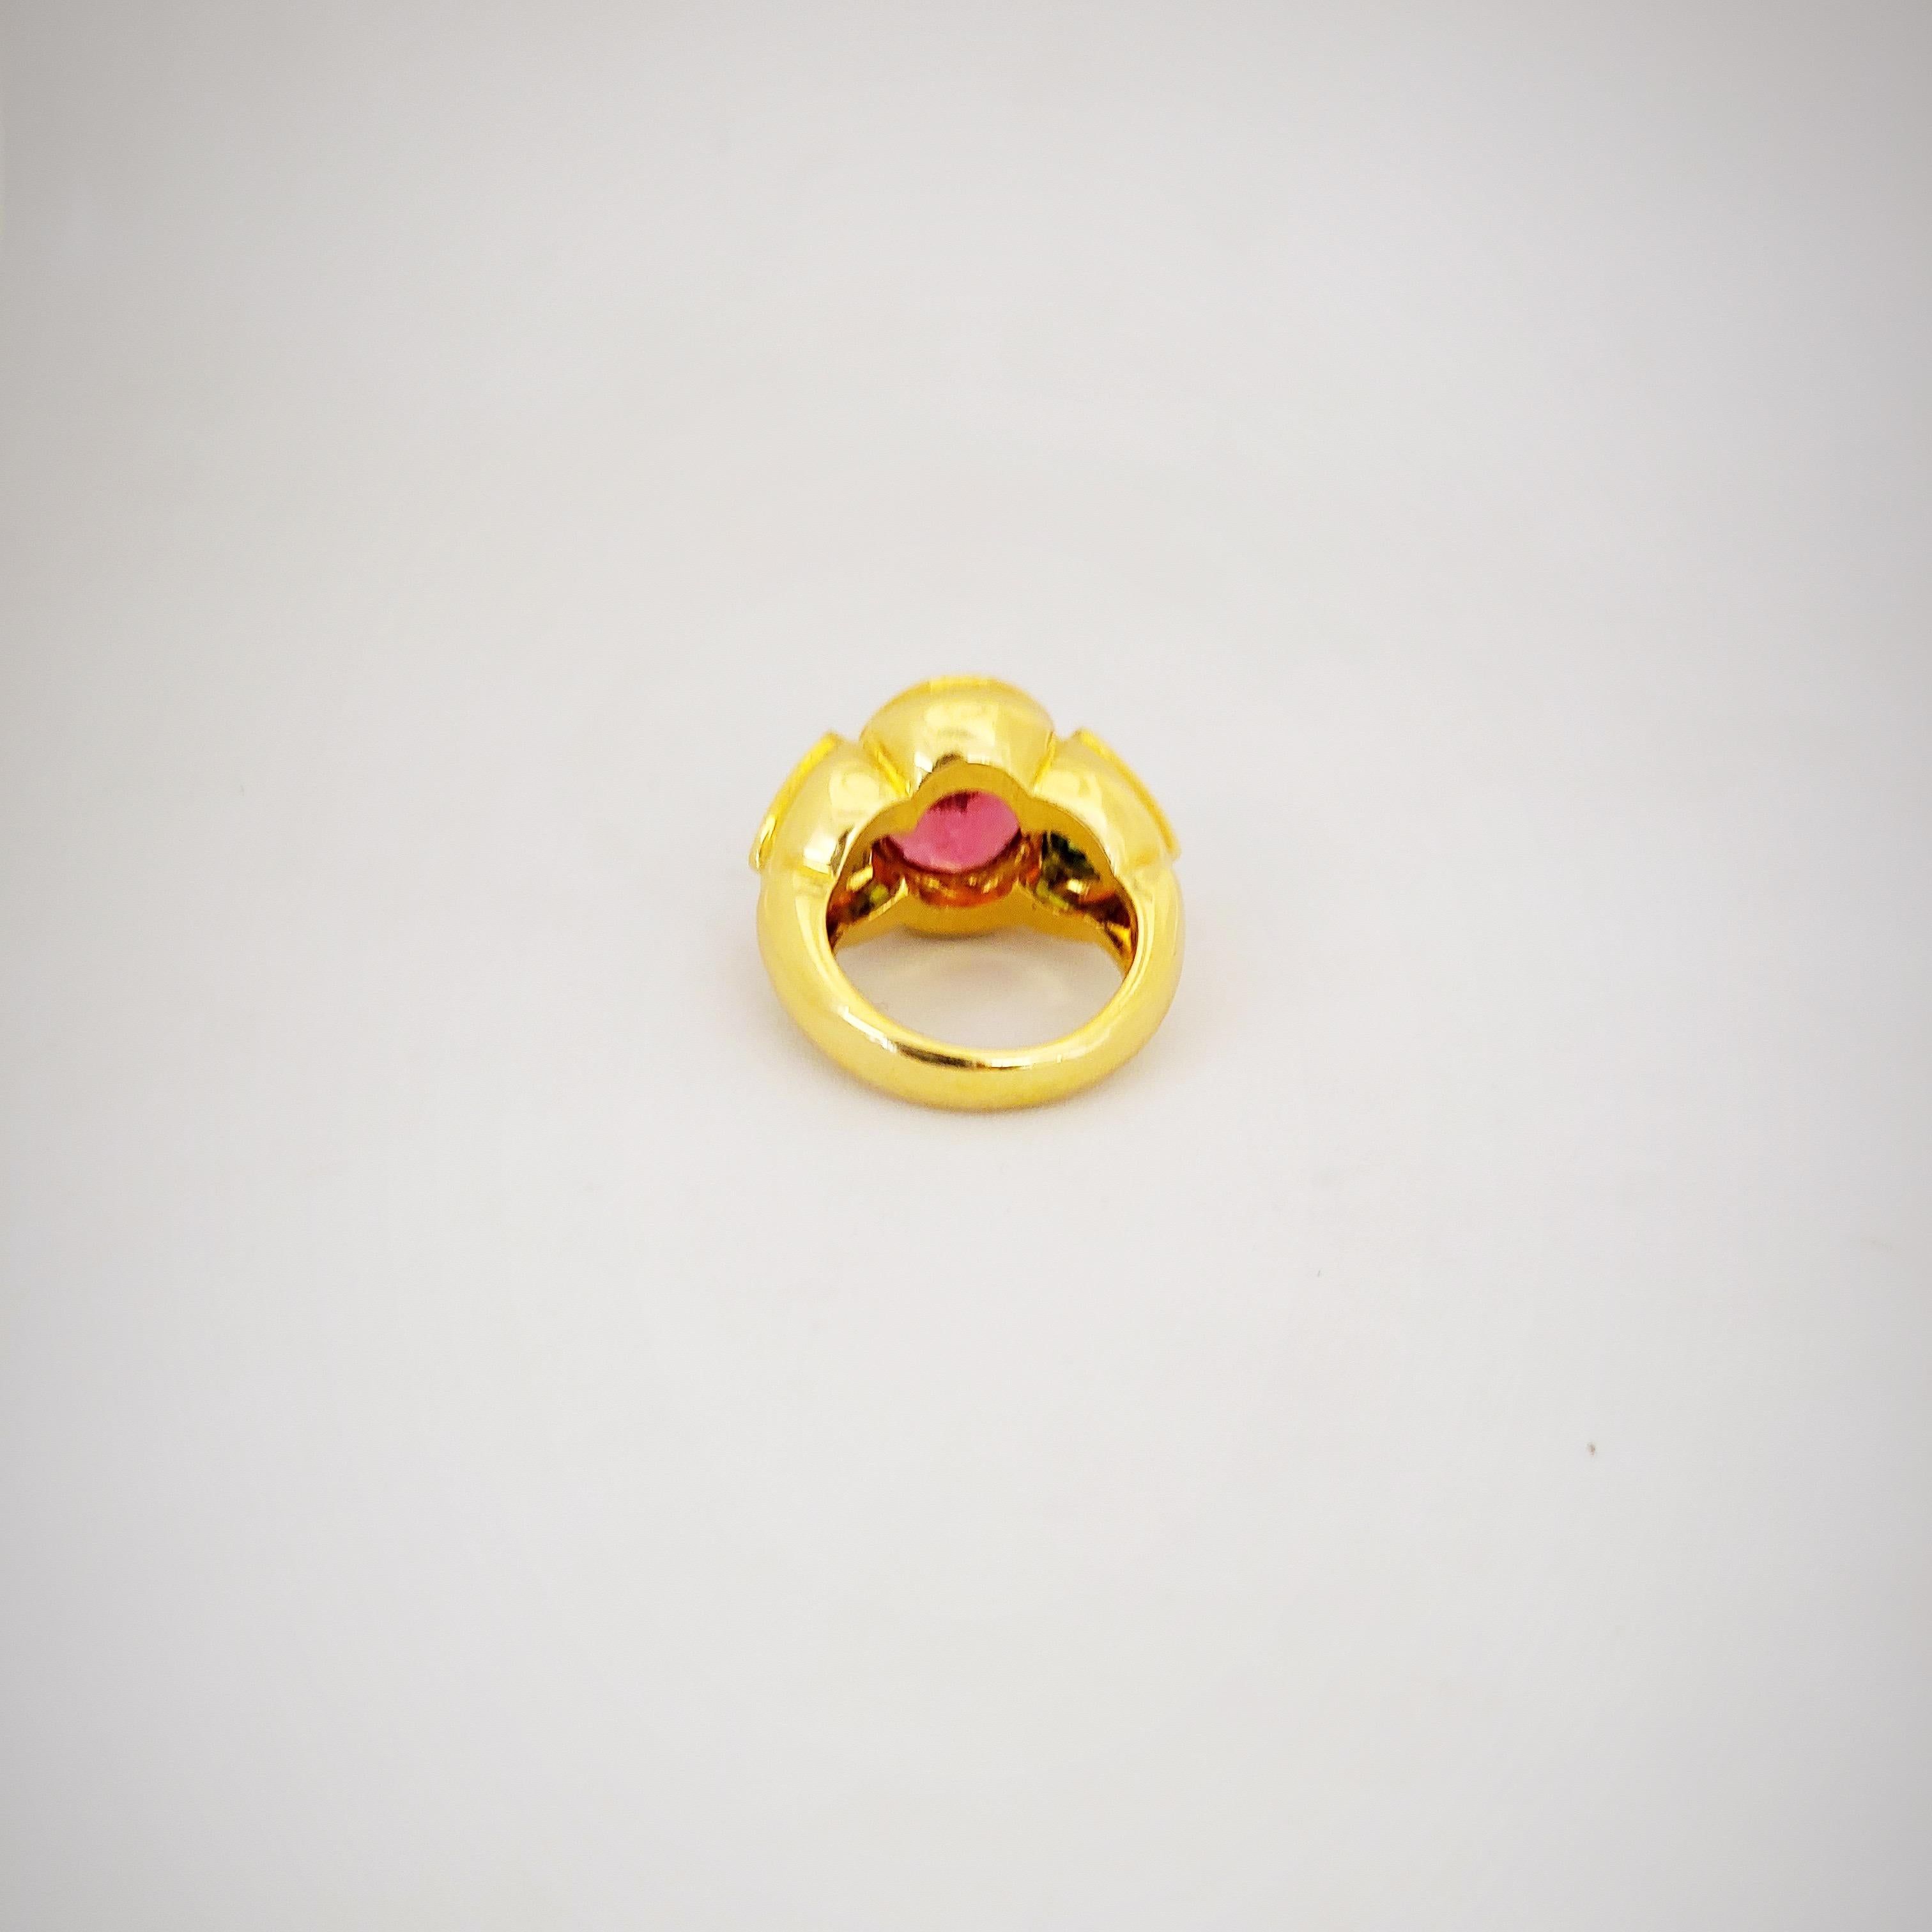 Cellini 18KT Yellow Gold Ring with 8.05 Carat Rubellite and 3.46 Carat Peridot For Sale 4